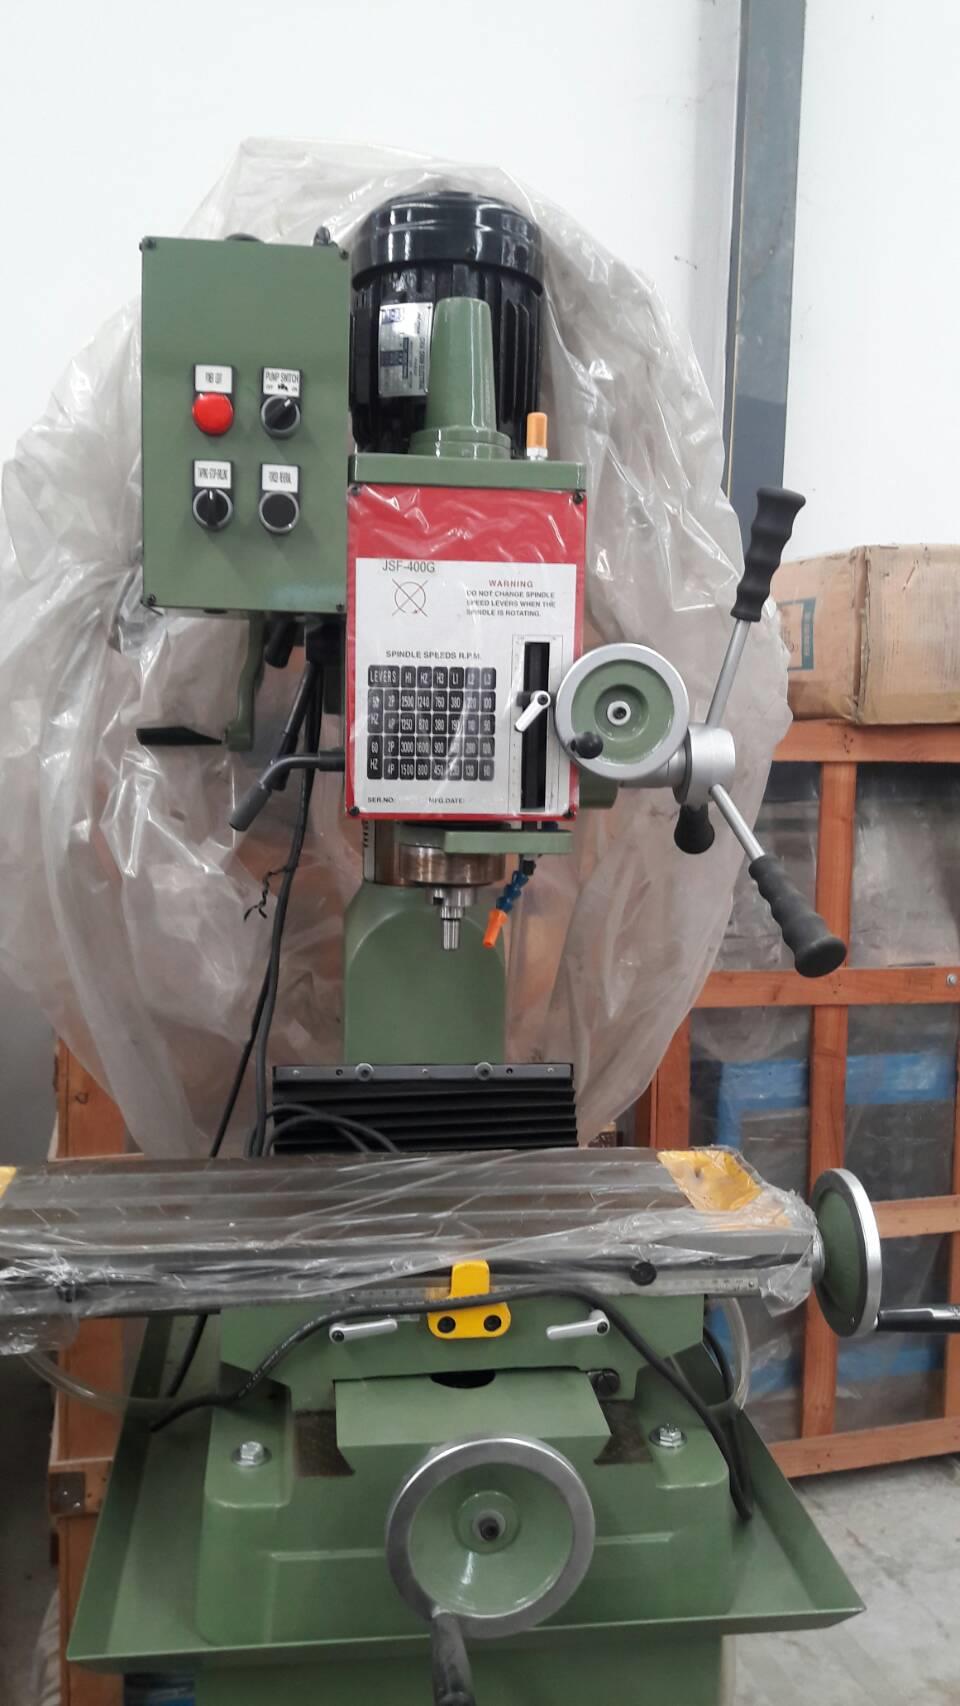 Tapping+ Drilling+ Milling  (3 In 1)  (เครื่องต๊าปเกลียวเจาะรูและมิลลิ่ง )   (JSF-400G),Tapping+ Drilling+ Milling  (3 In 1)  (เครื่องต๊าปเกลียวเจาะรูและมิลลิ่ง )   (JSF-400G),Tapping+ Drilling+ Milling  (3 In 1)  (เครื่องต๊าปเกลียวเจาะรูและมิลลิ่ง )   (JSF-400G),Machinery and Process Equipment/Dies and Molds